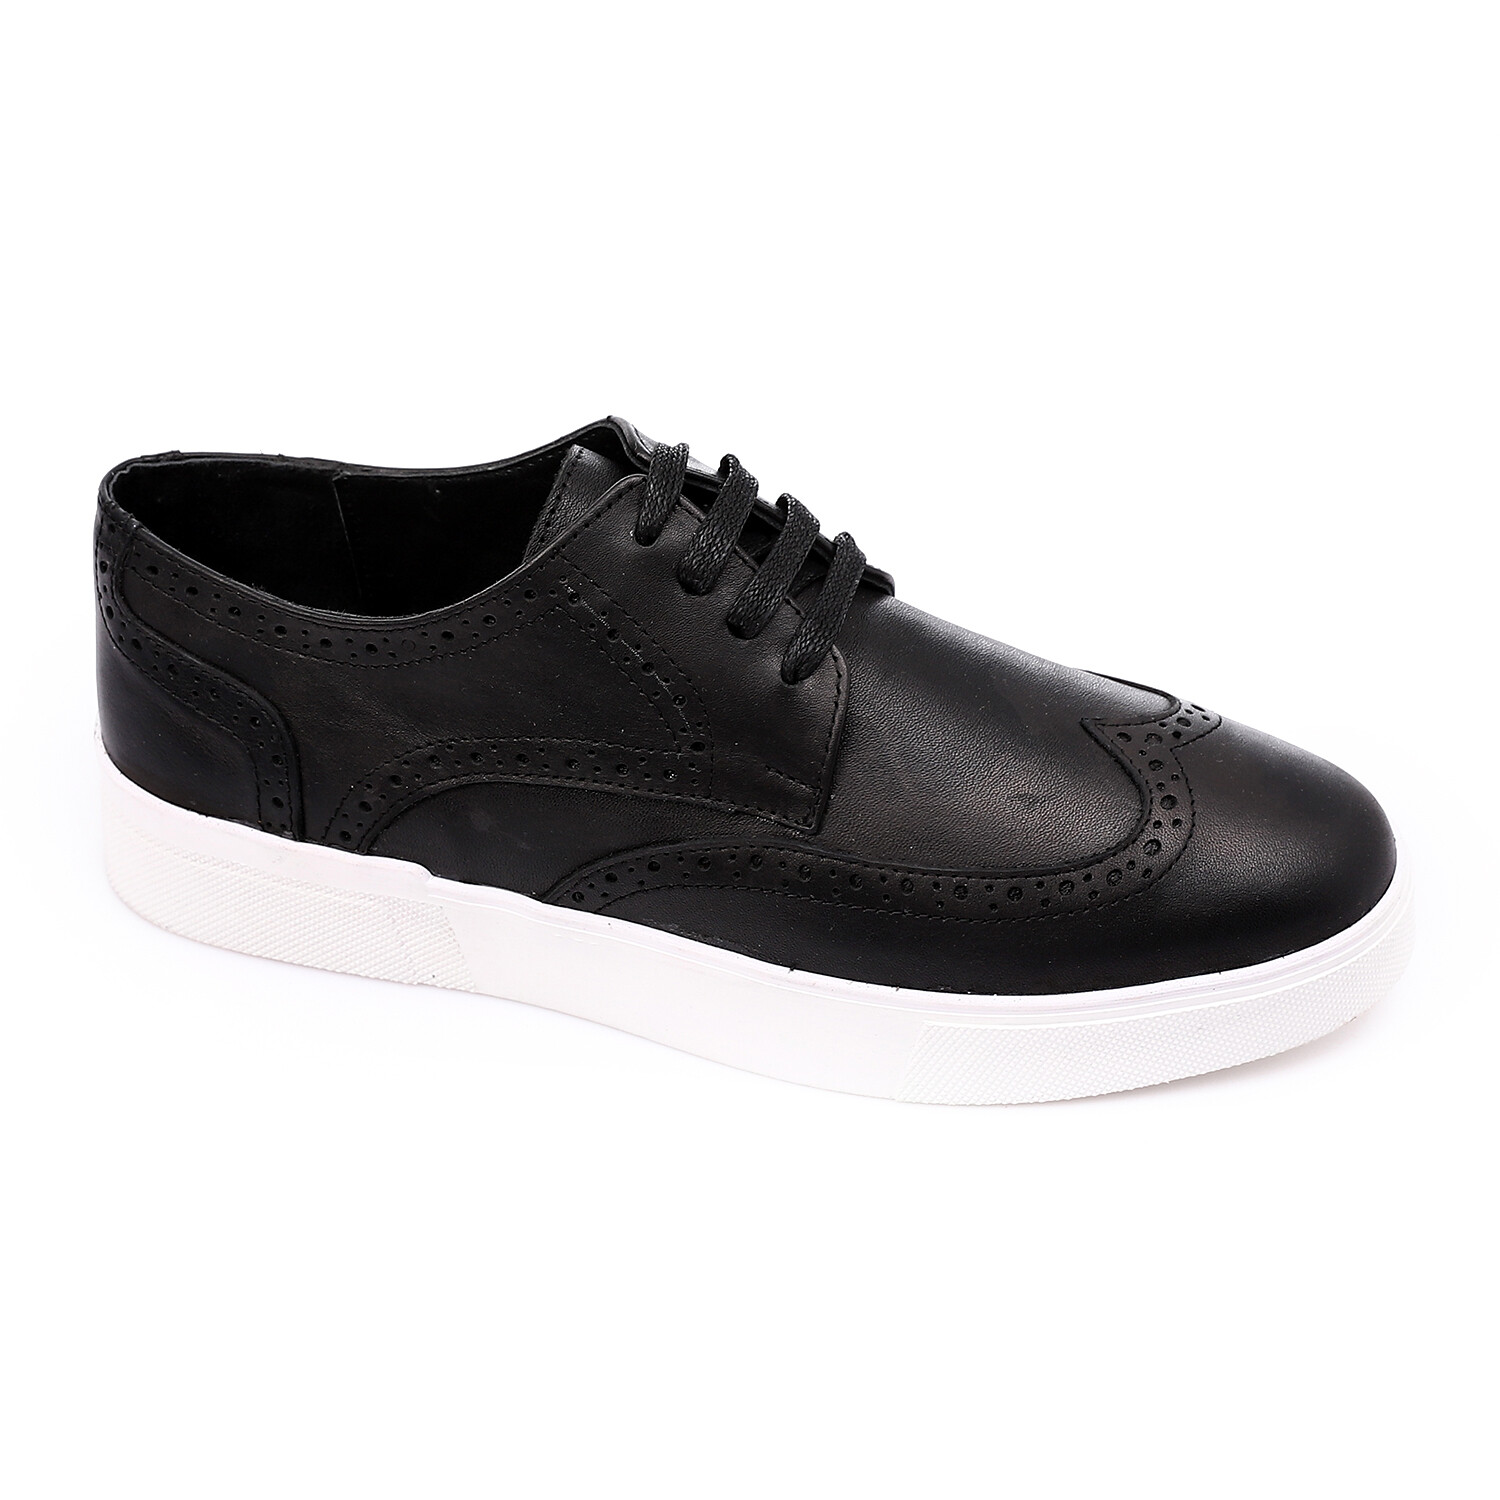 Lace Up Round Toecap Flat Sneakers - Black 3953